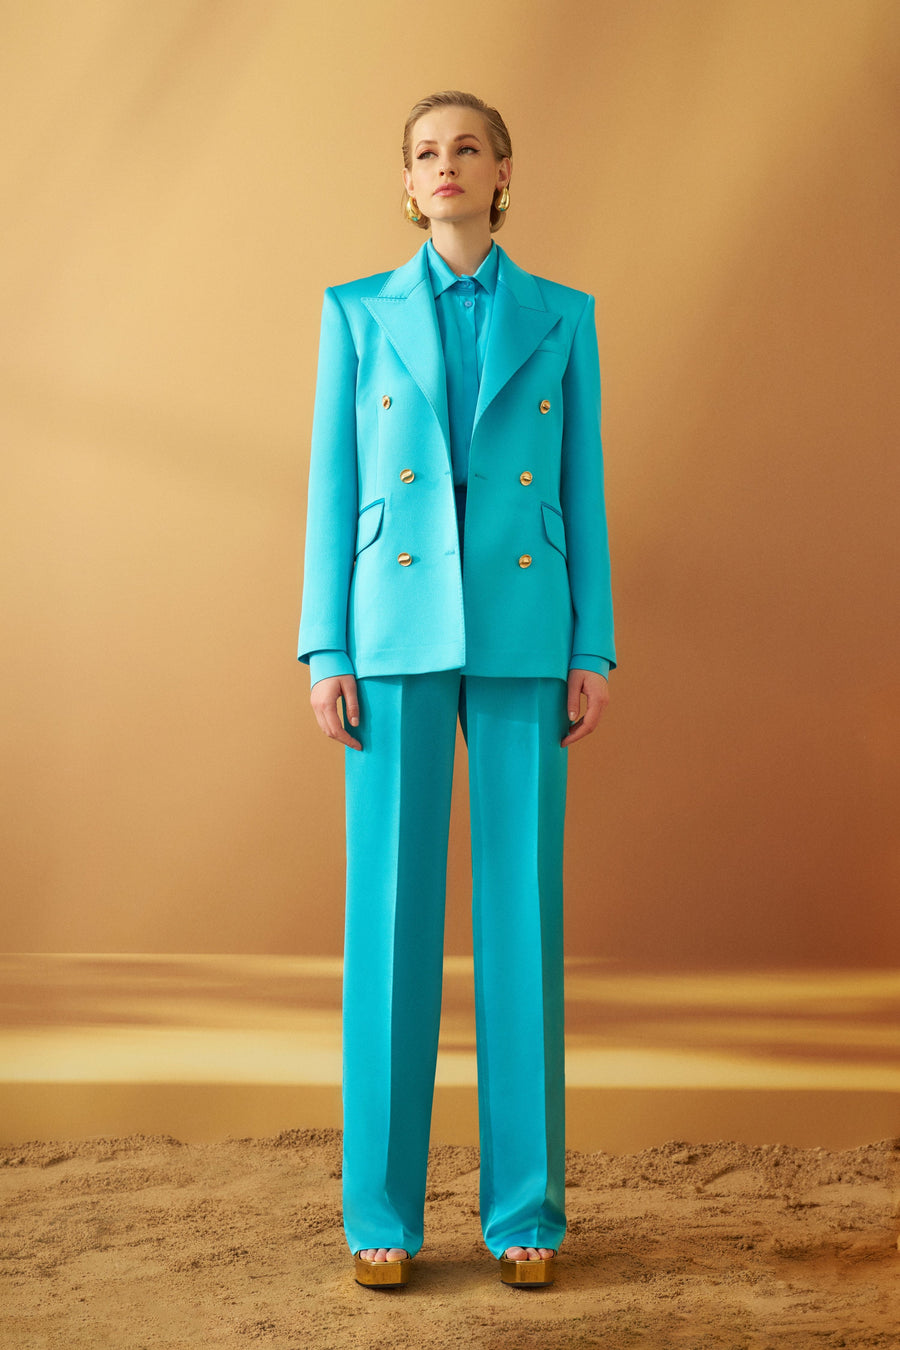 Blue Crepe Trousers